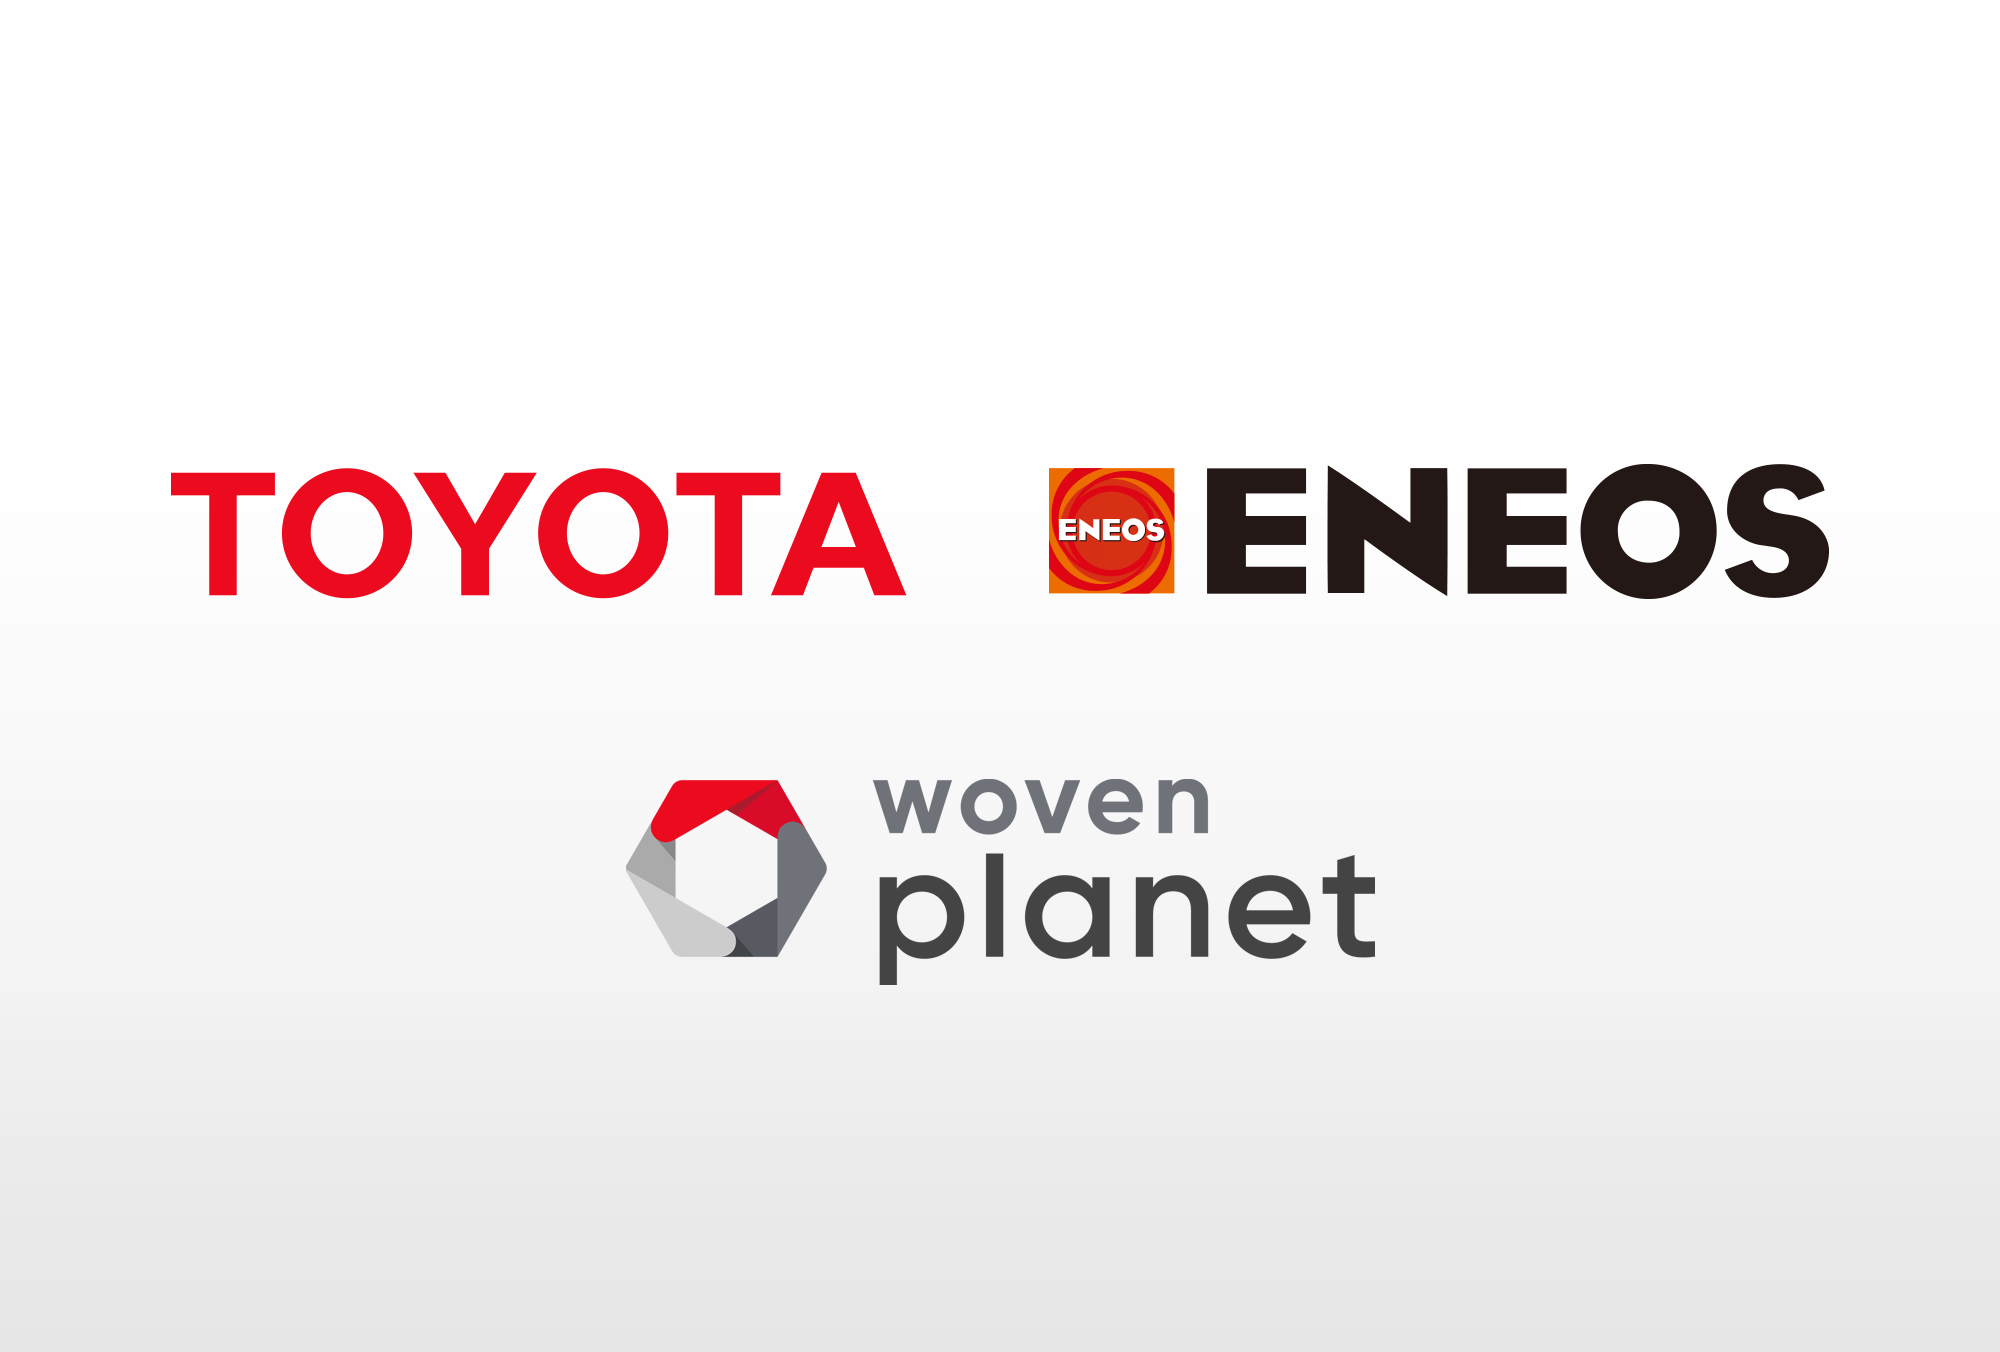 Toyota, ENEOS, and Woven Planet logos